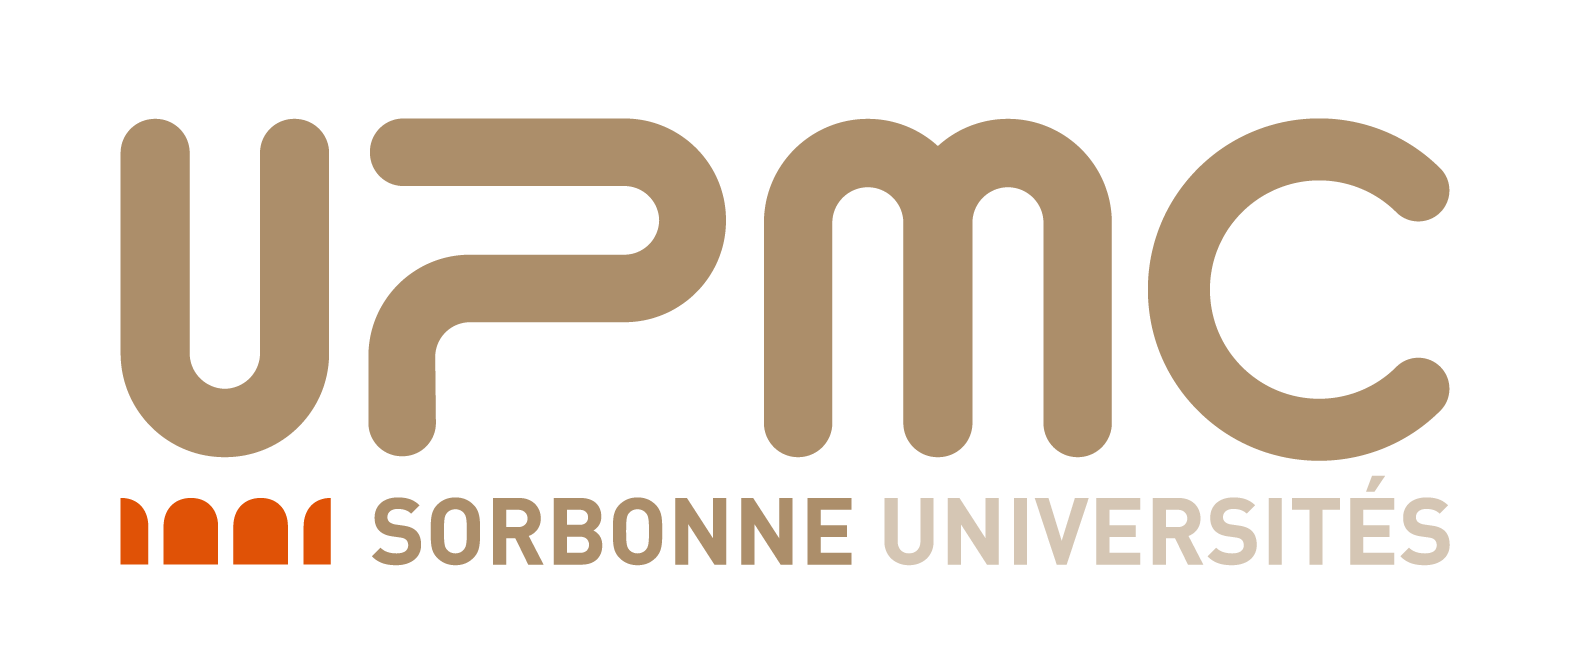 University Pierre and Marie Curie